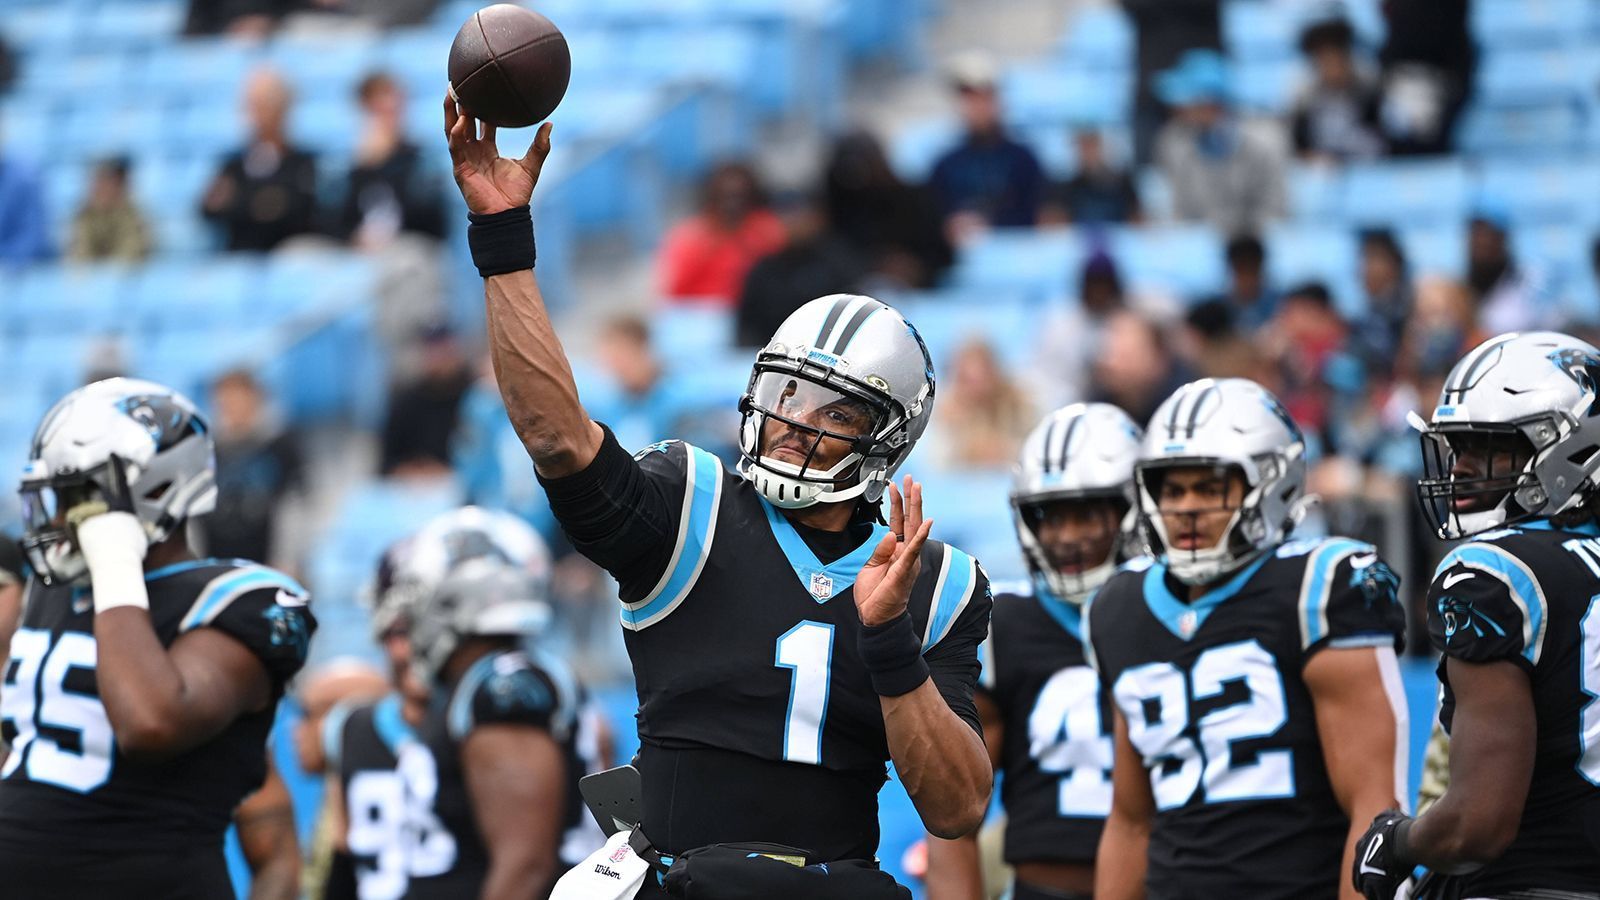 
                <strong>Carolina Panthers</strong><br>
                &#x2022; Runde 1 (Trade mit Bears): 1. Pick: Bryce Young, Quarterback, Alabama<br>&#x2022; Runde 2: 39. Pick: Jonathan Mingo, Wide Receiver, Ole Miss Rebels <br>&#x2022; Runde 3 (Trade mit Steelers): 80. Pick: DJ Johnson, Edge Rusher, Oregon Ducks<br>&#x2022; Runde 4: 114. Pick: Chandler Zavala, Guard, N.C. State<br>&#x2022; Runde 5: 145. Pick: Jammie Robinson, Strong Safety, Florida State<br>
              